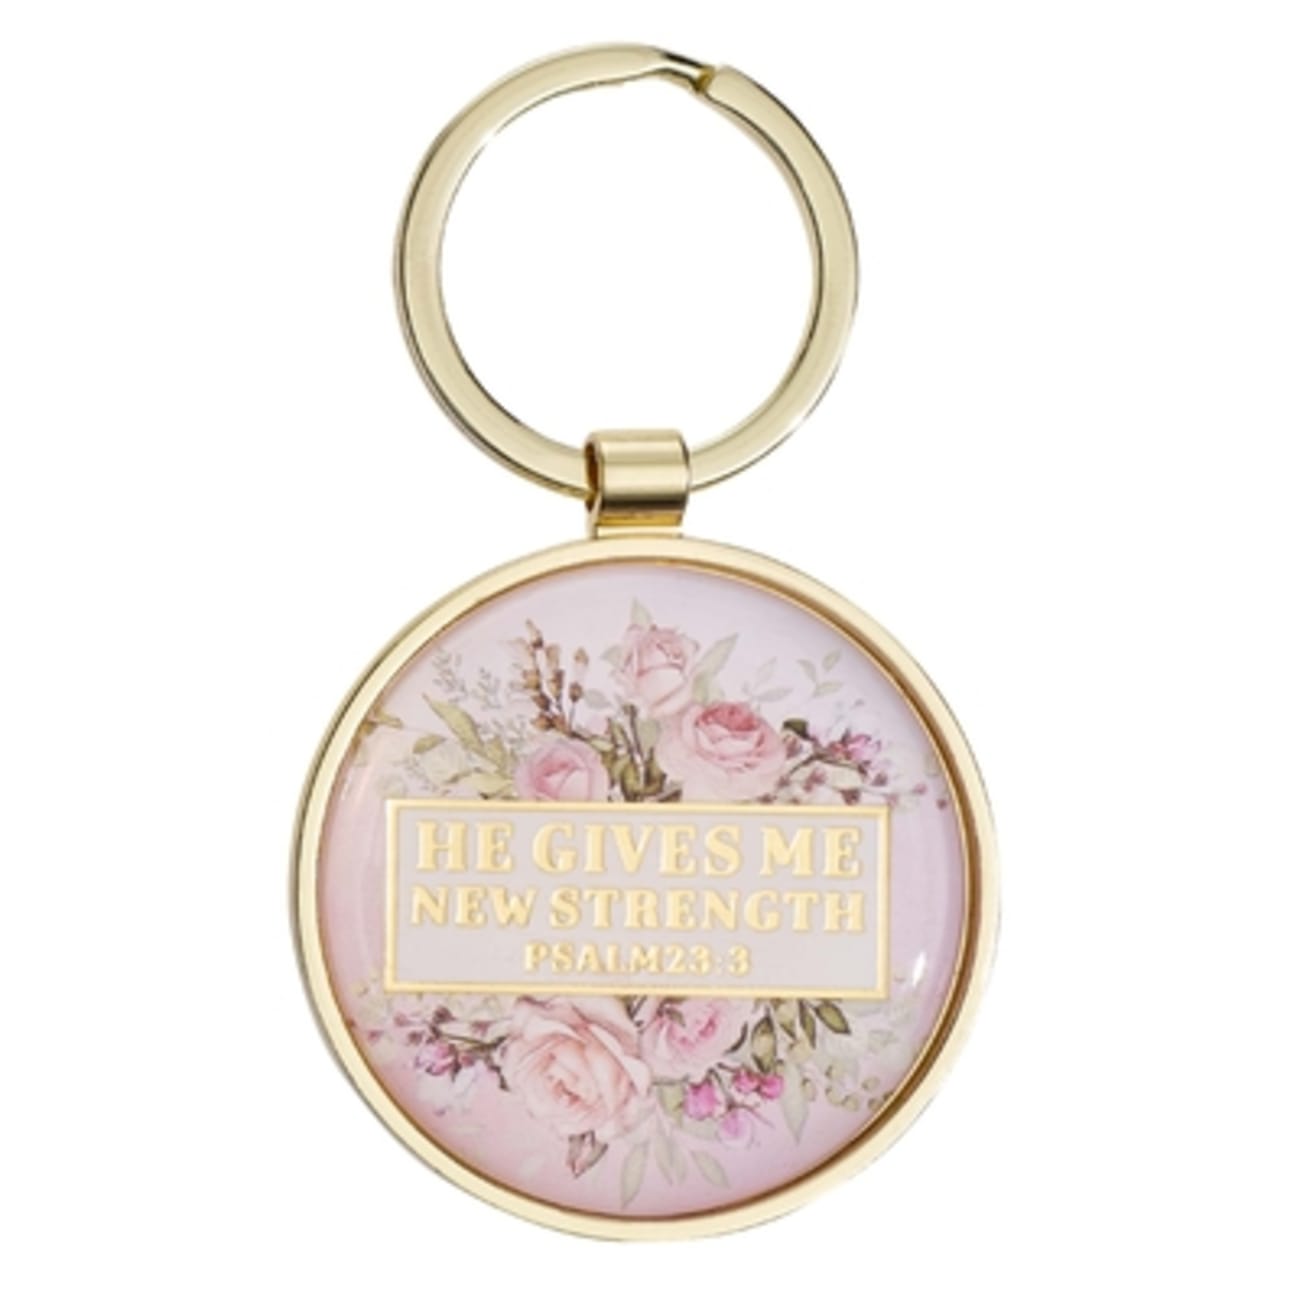 Metal Keyring: He Gives Me New Strength Cream Floral (Psalm 23:3) Jewellery